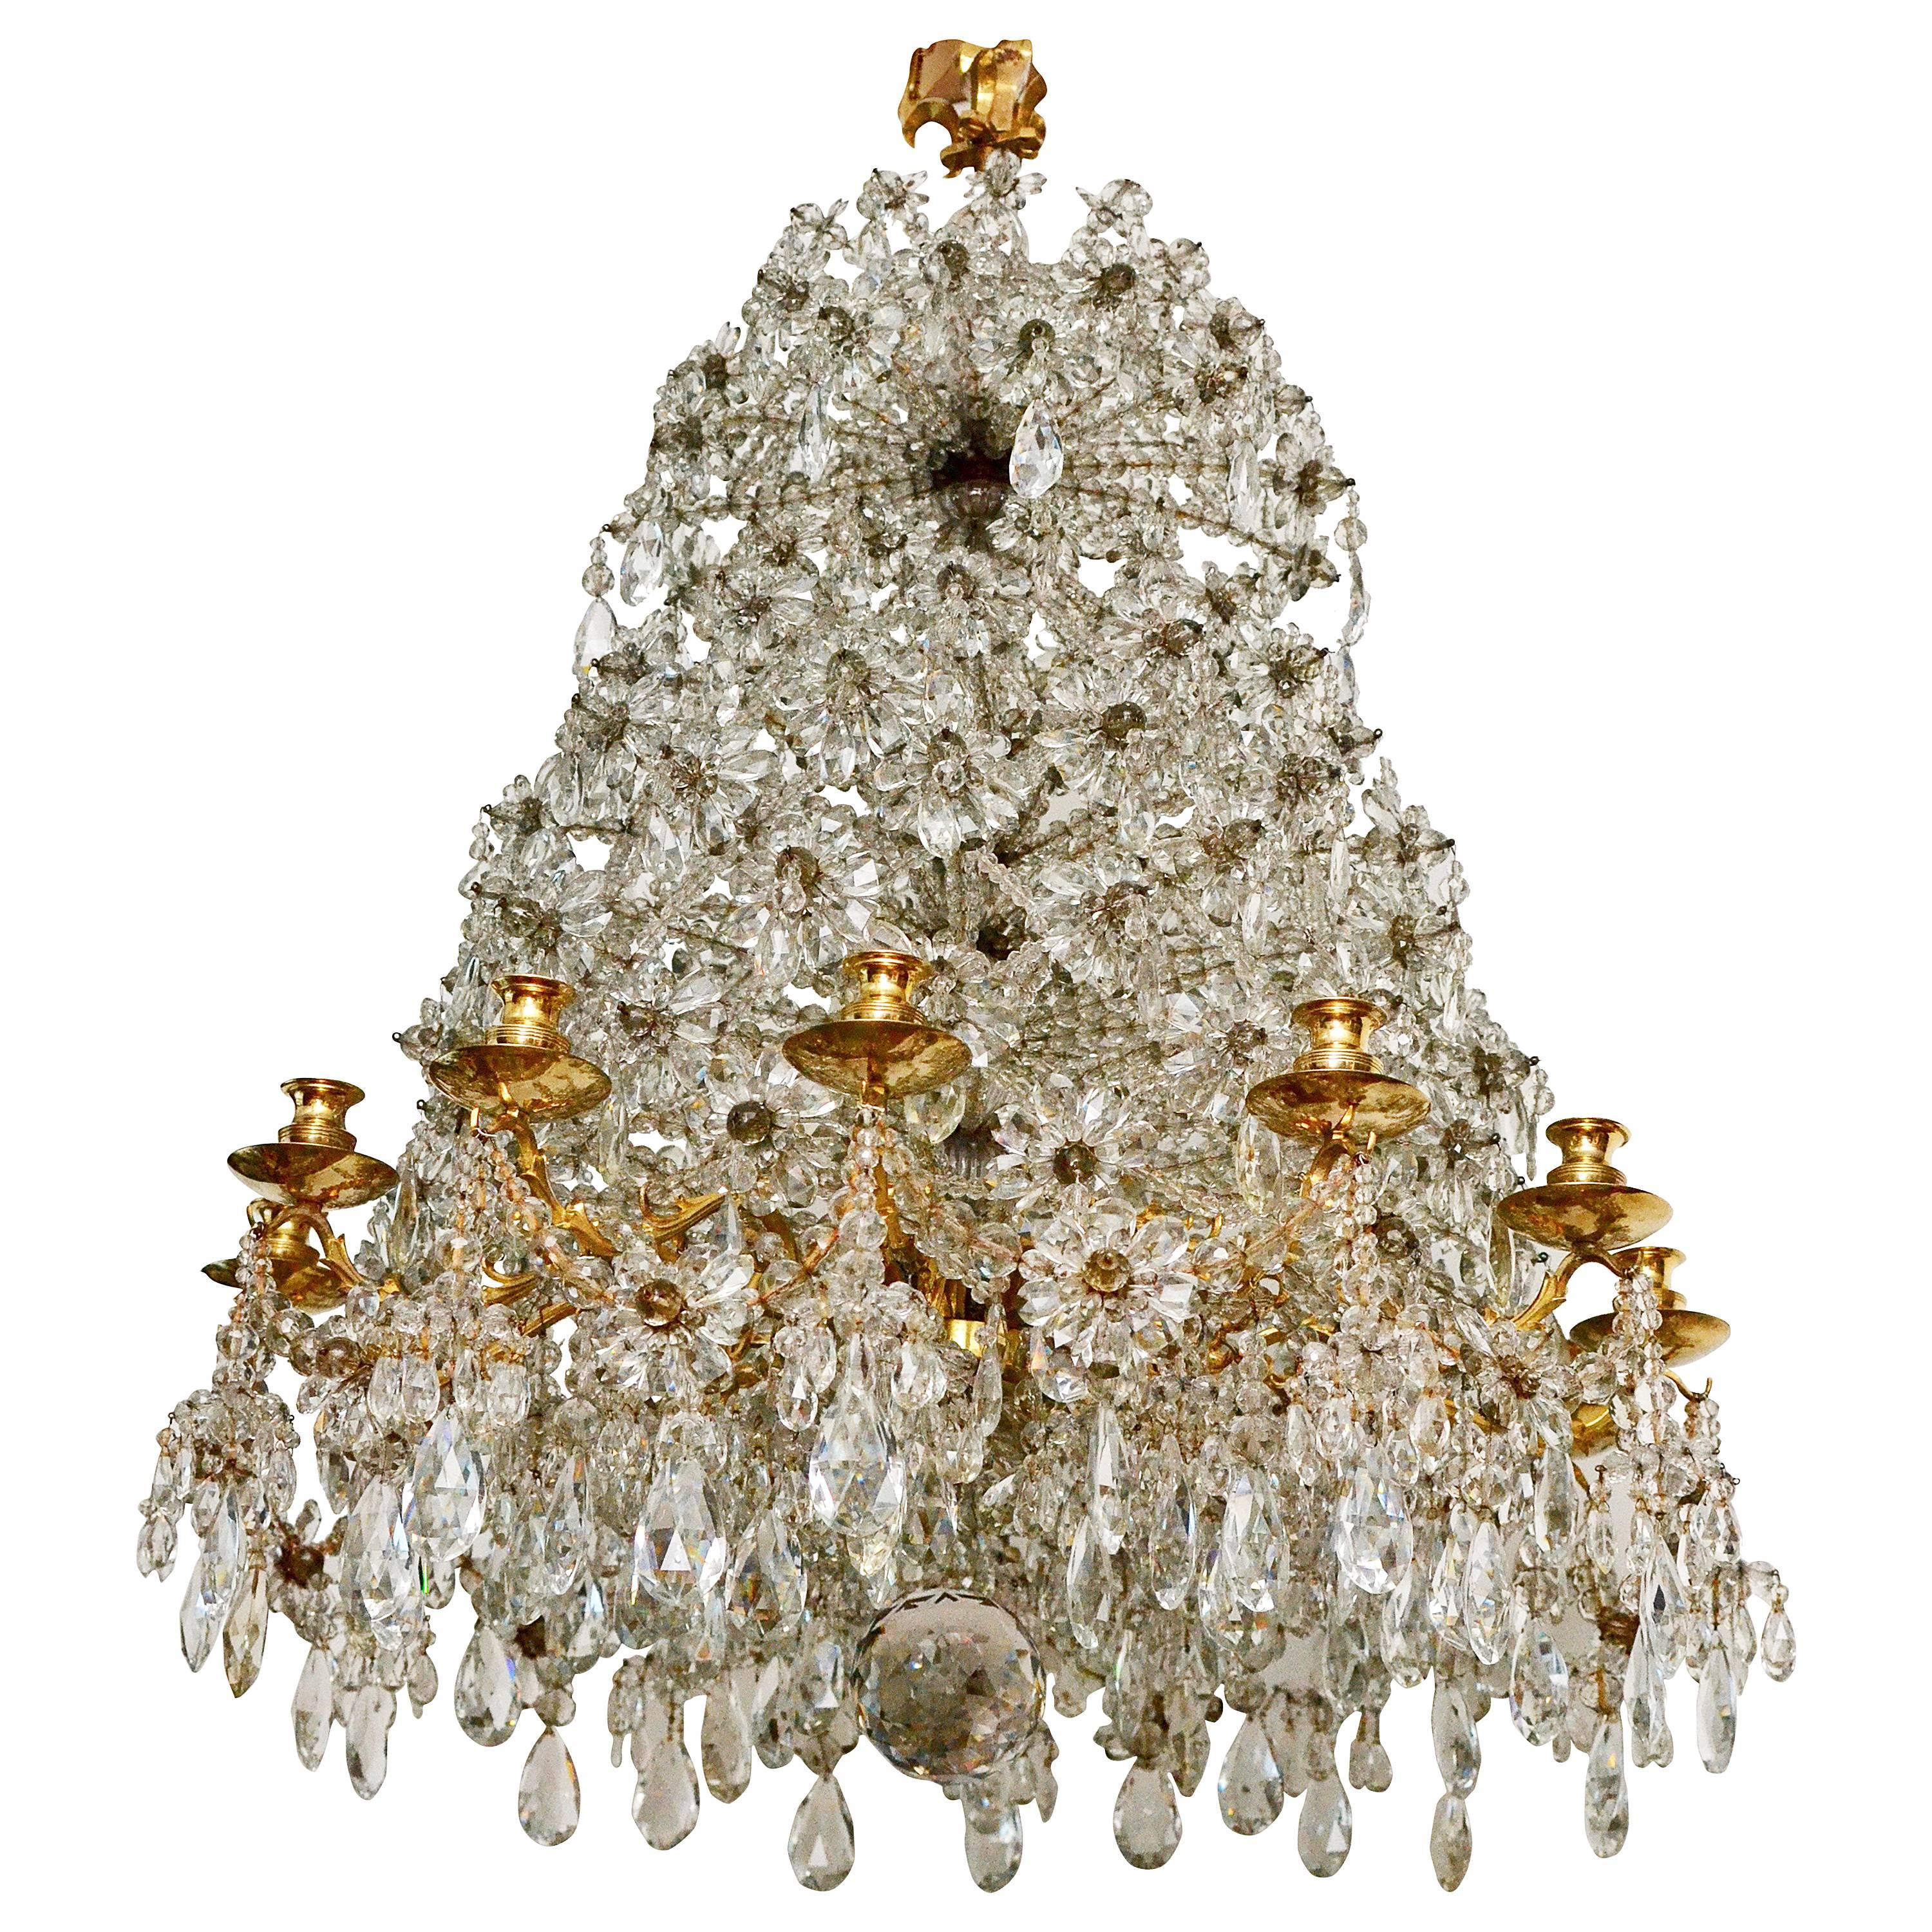 Rare 19th Century Gilt Bronze and Crystal Louis XIV Style Chandelier